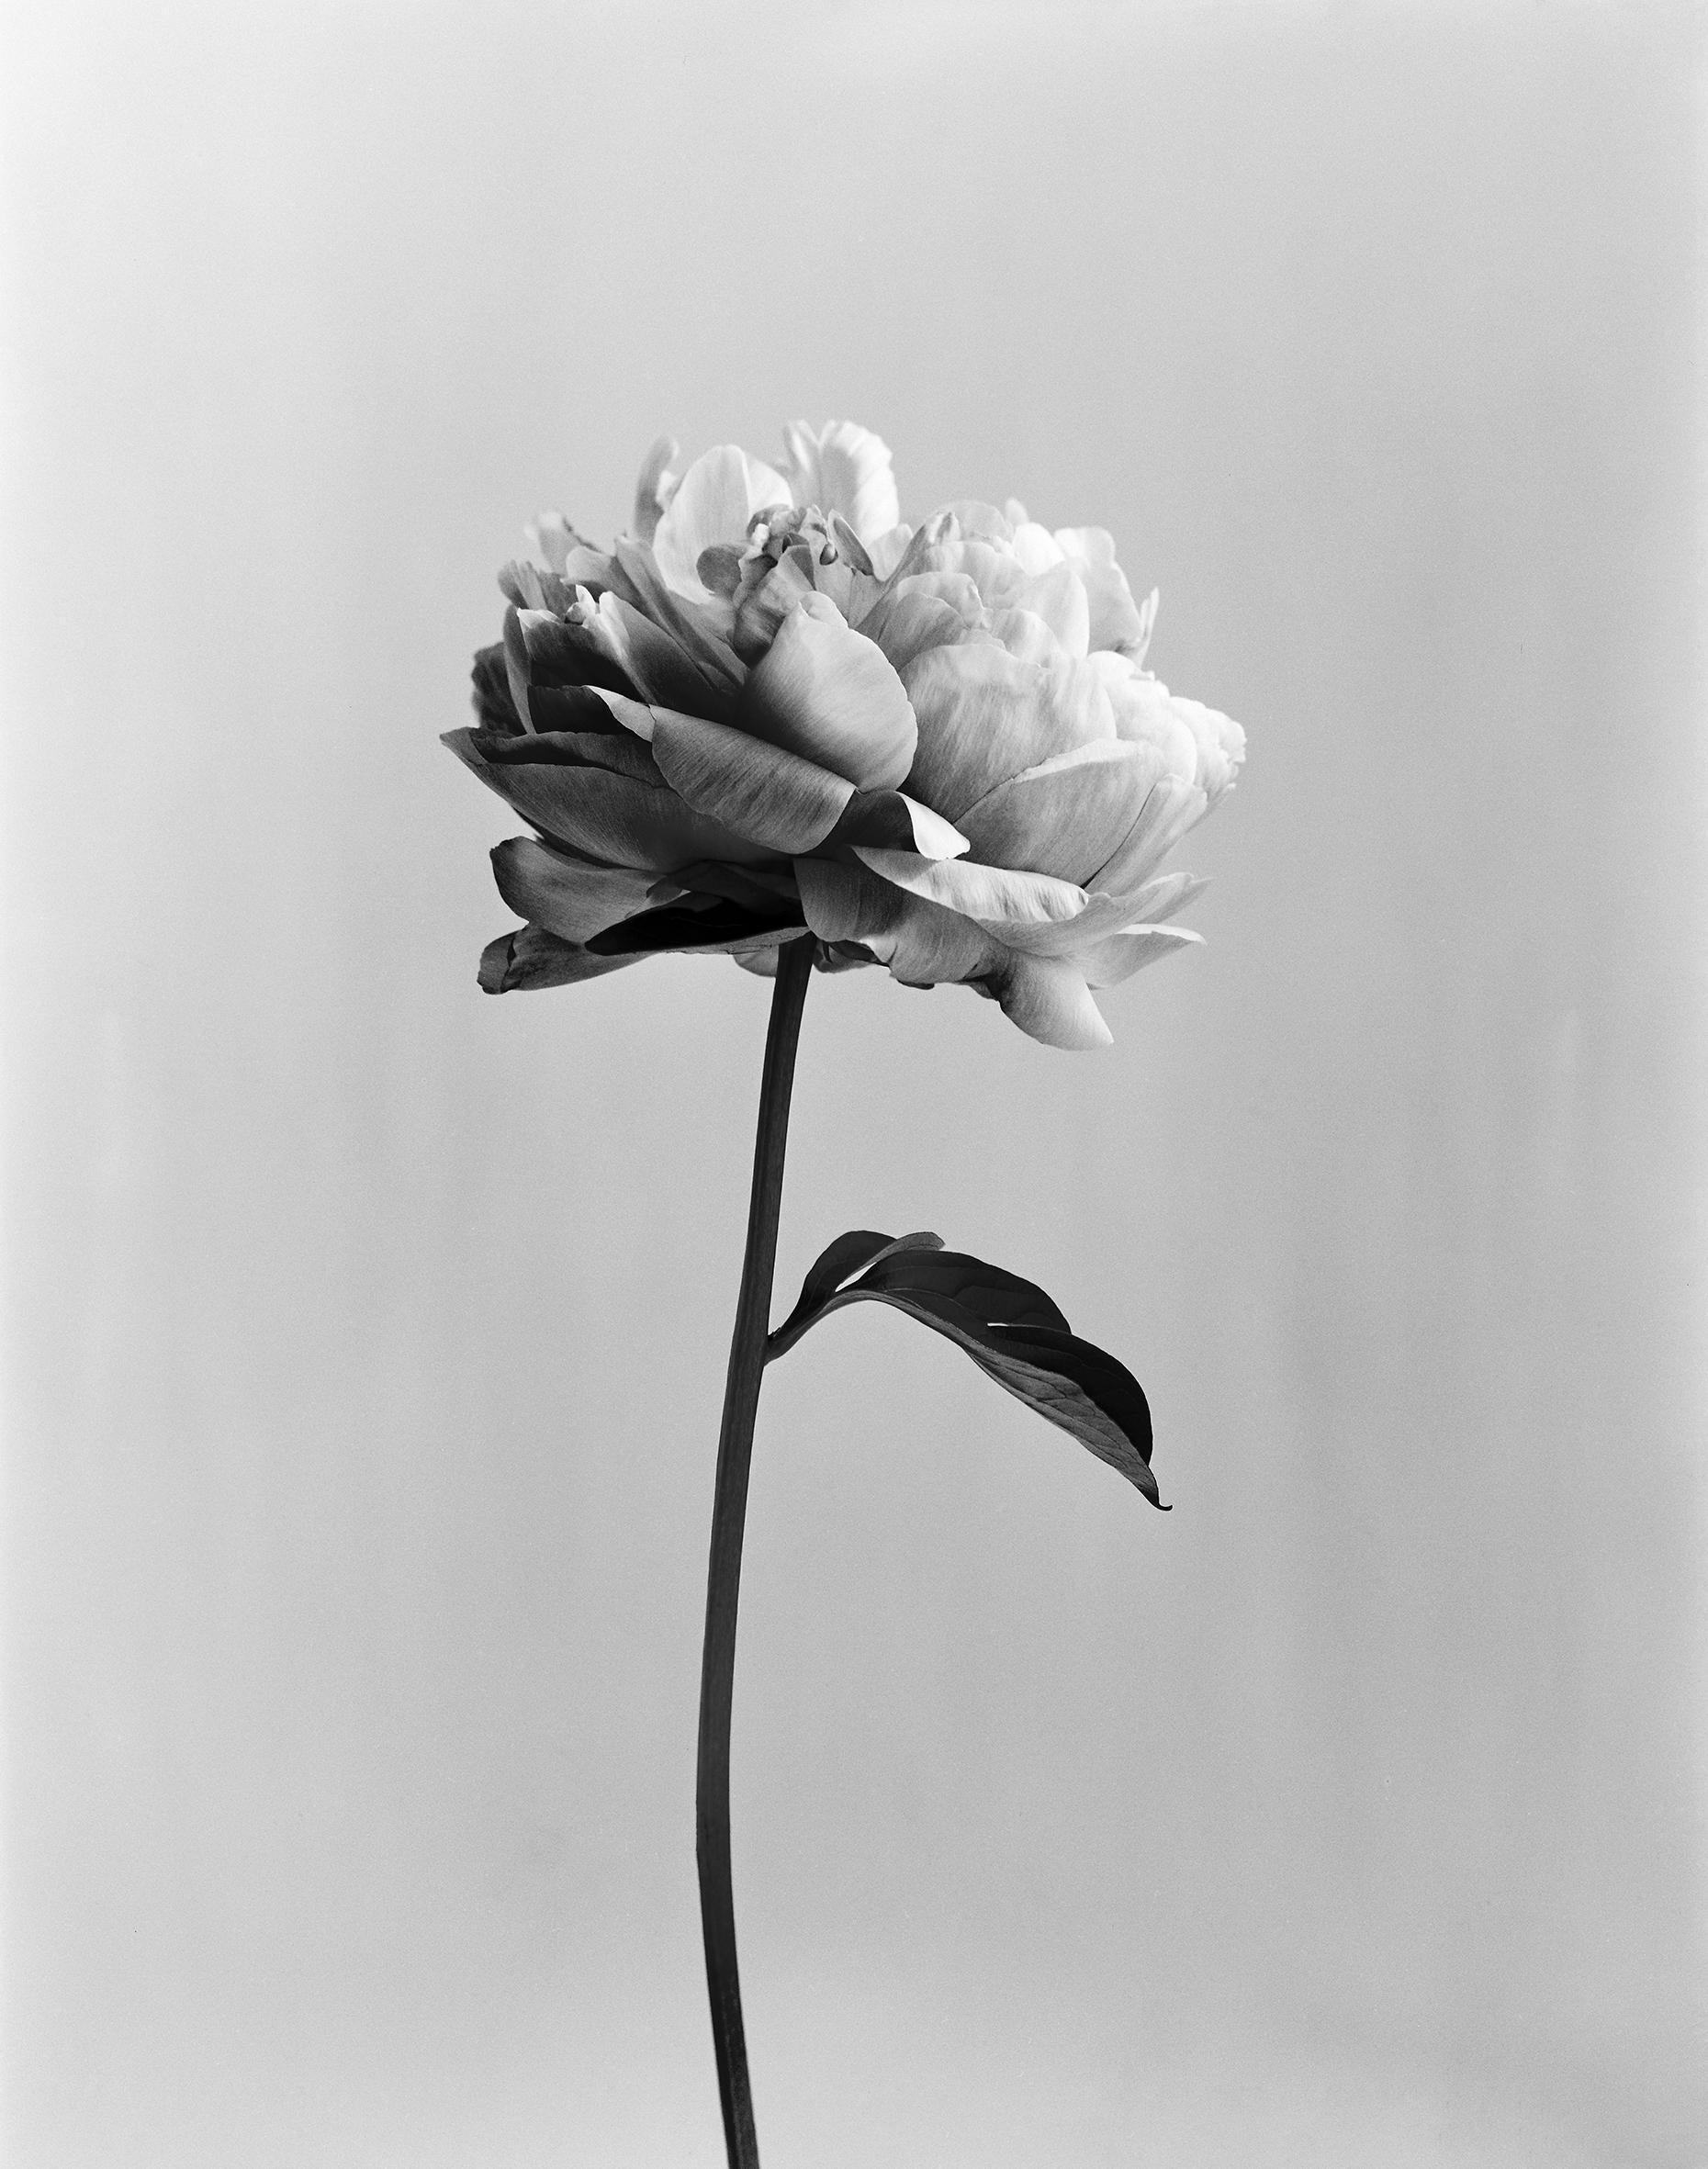 Peony no.3 - analogue black and white floral photography, limited edition of 15